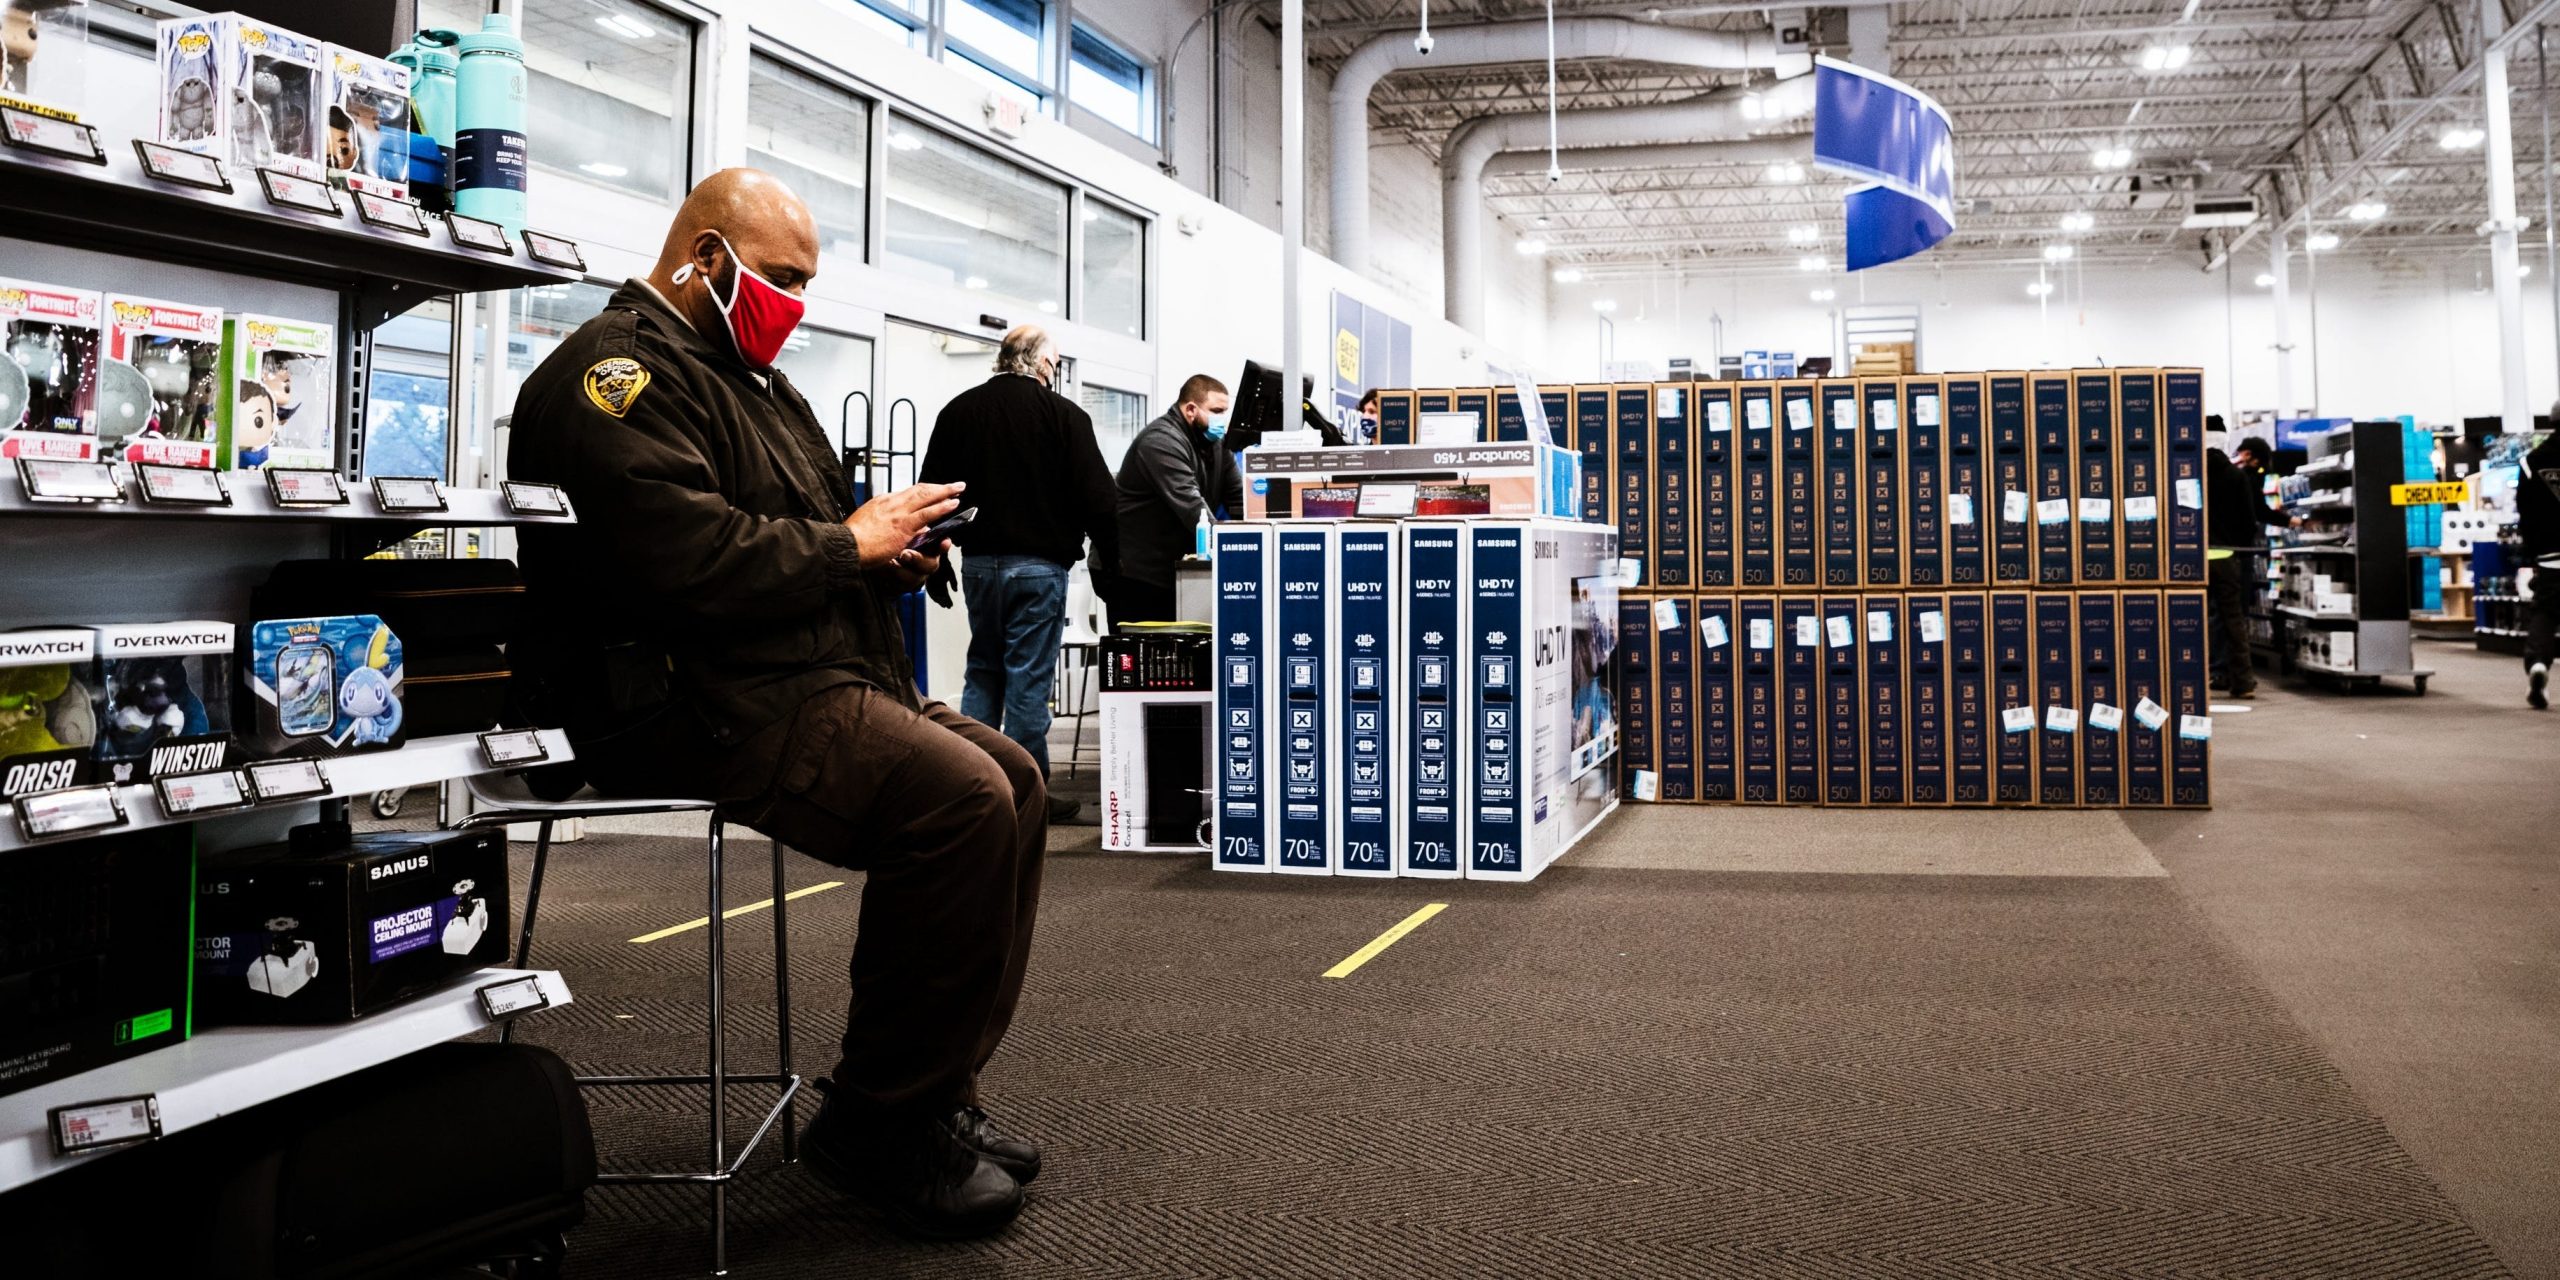 A police officer wears a mask while sitting on guard at a Best Buy in Kentucky.